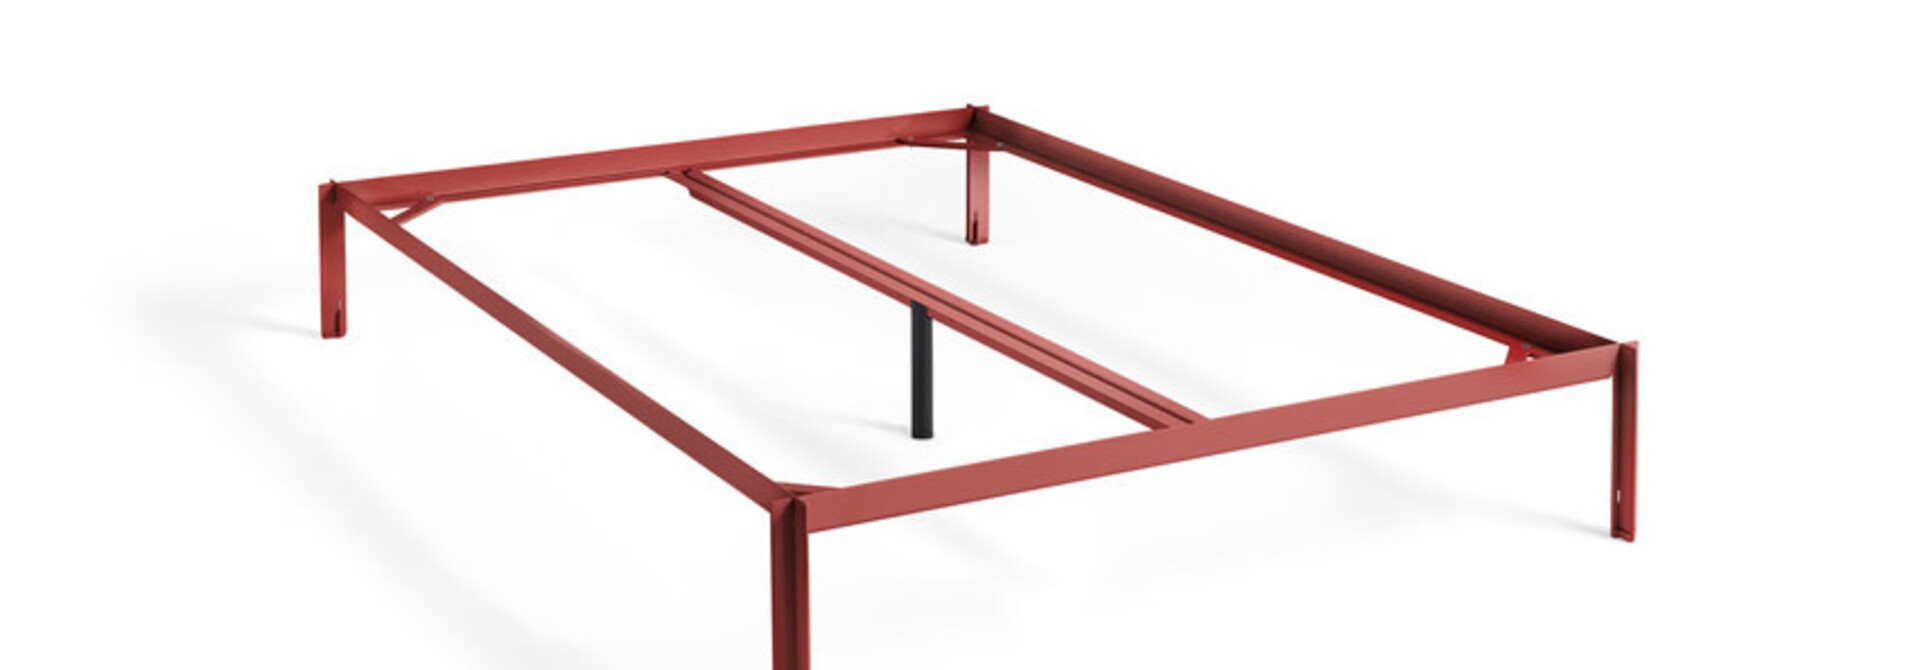 Connect Bed Frame 140x200cm